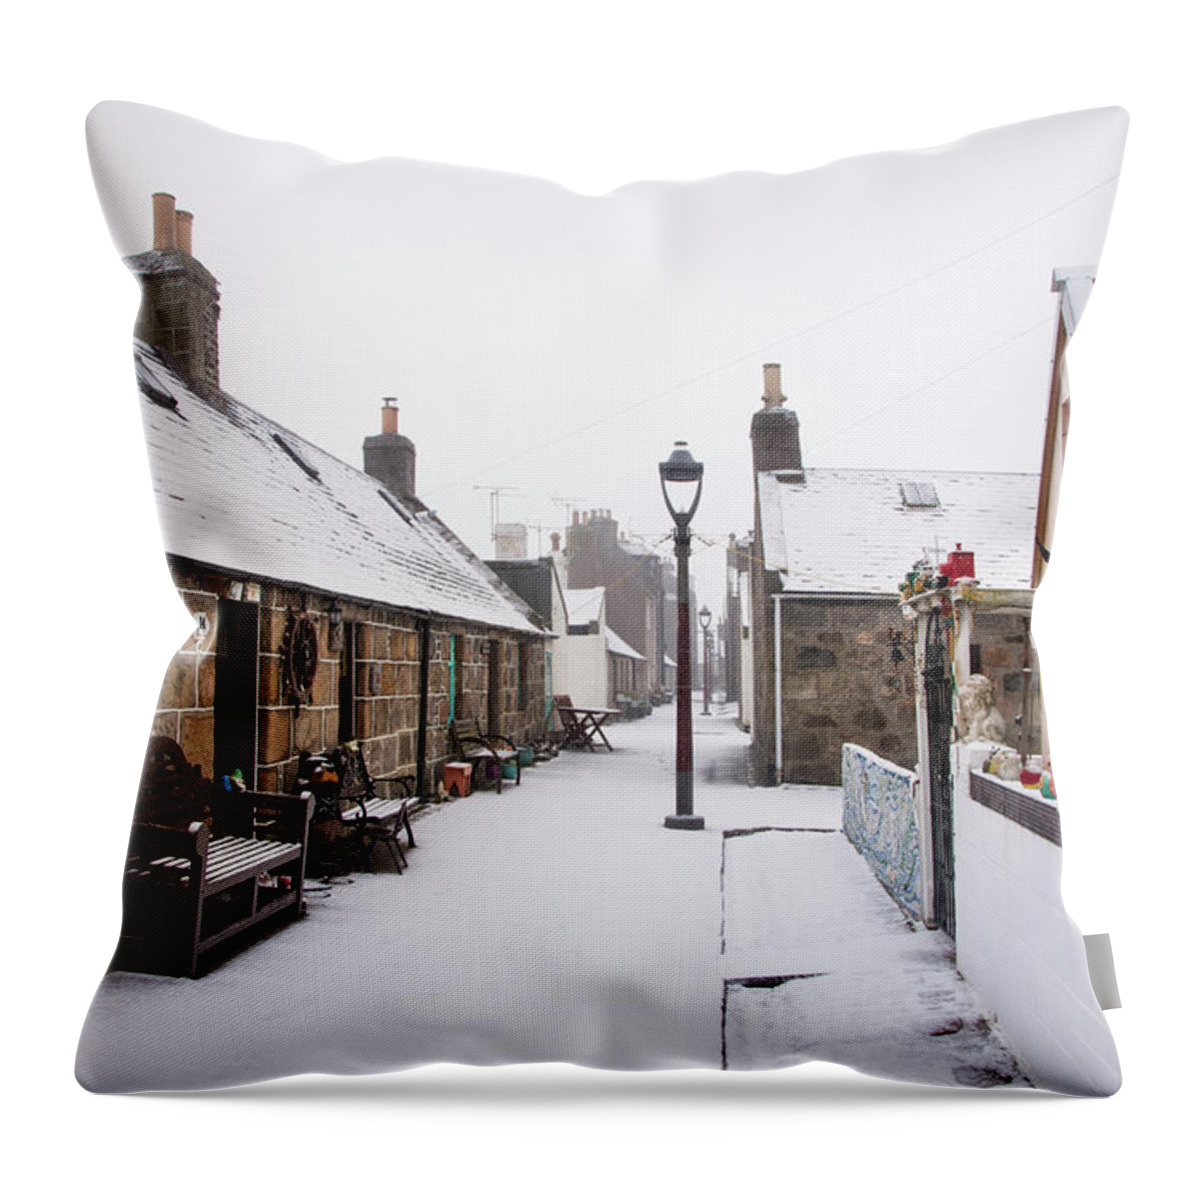 Fittie Throw Pillow featuring the photograph Fittie in the Snow #2 by Veli Bariskan